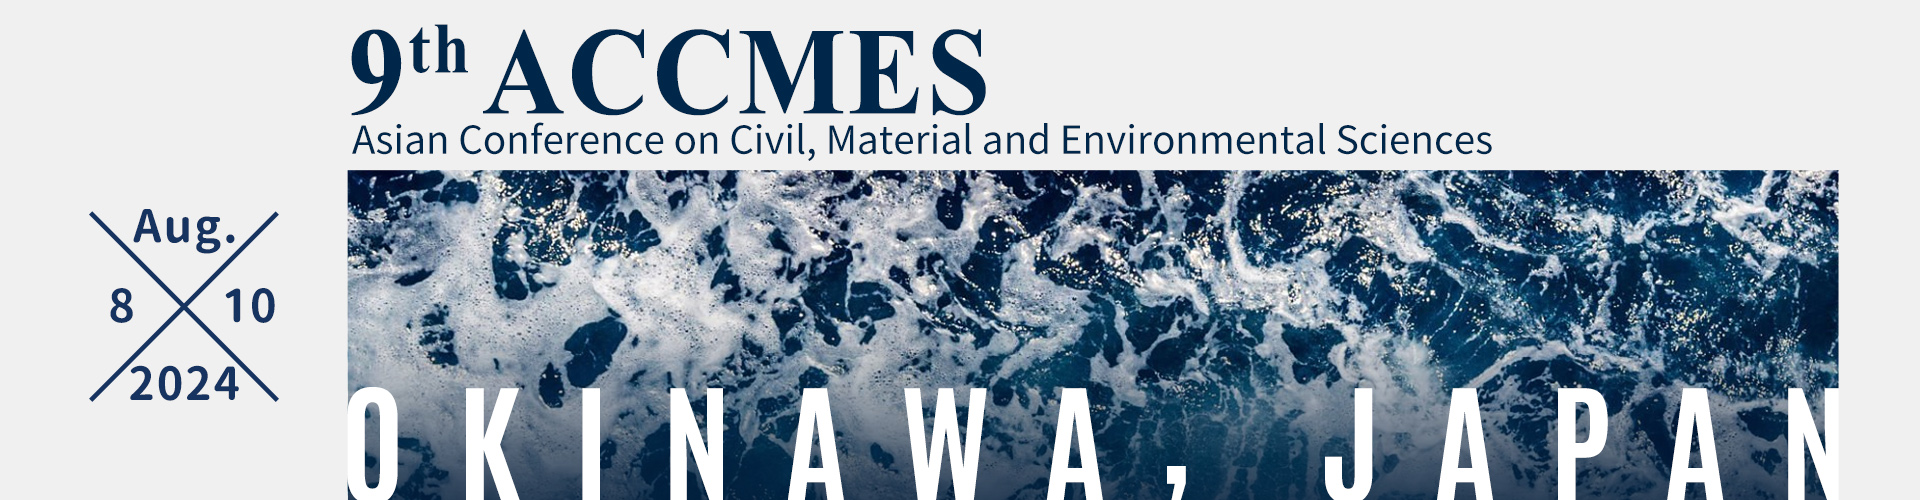 9th Asian Conference on Civil, Material and Environmental Sciences, Okinawa, Japan